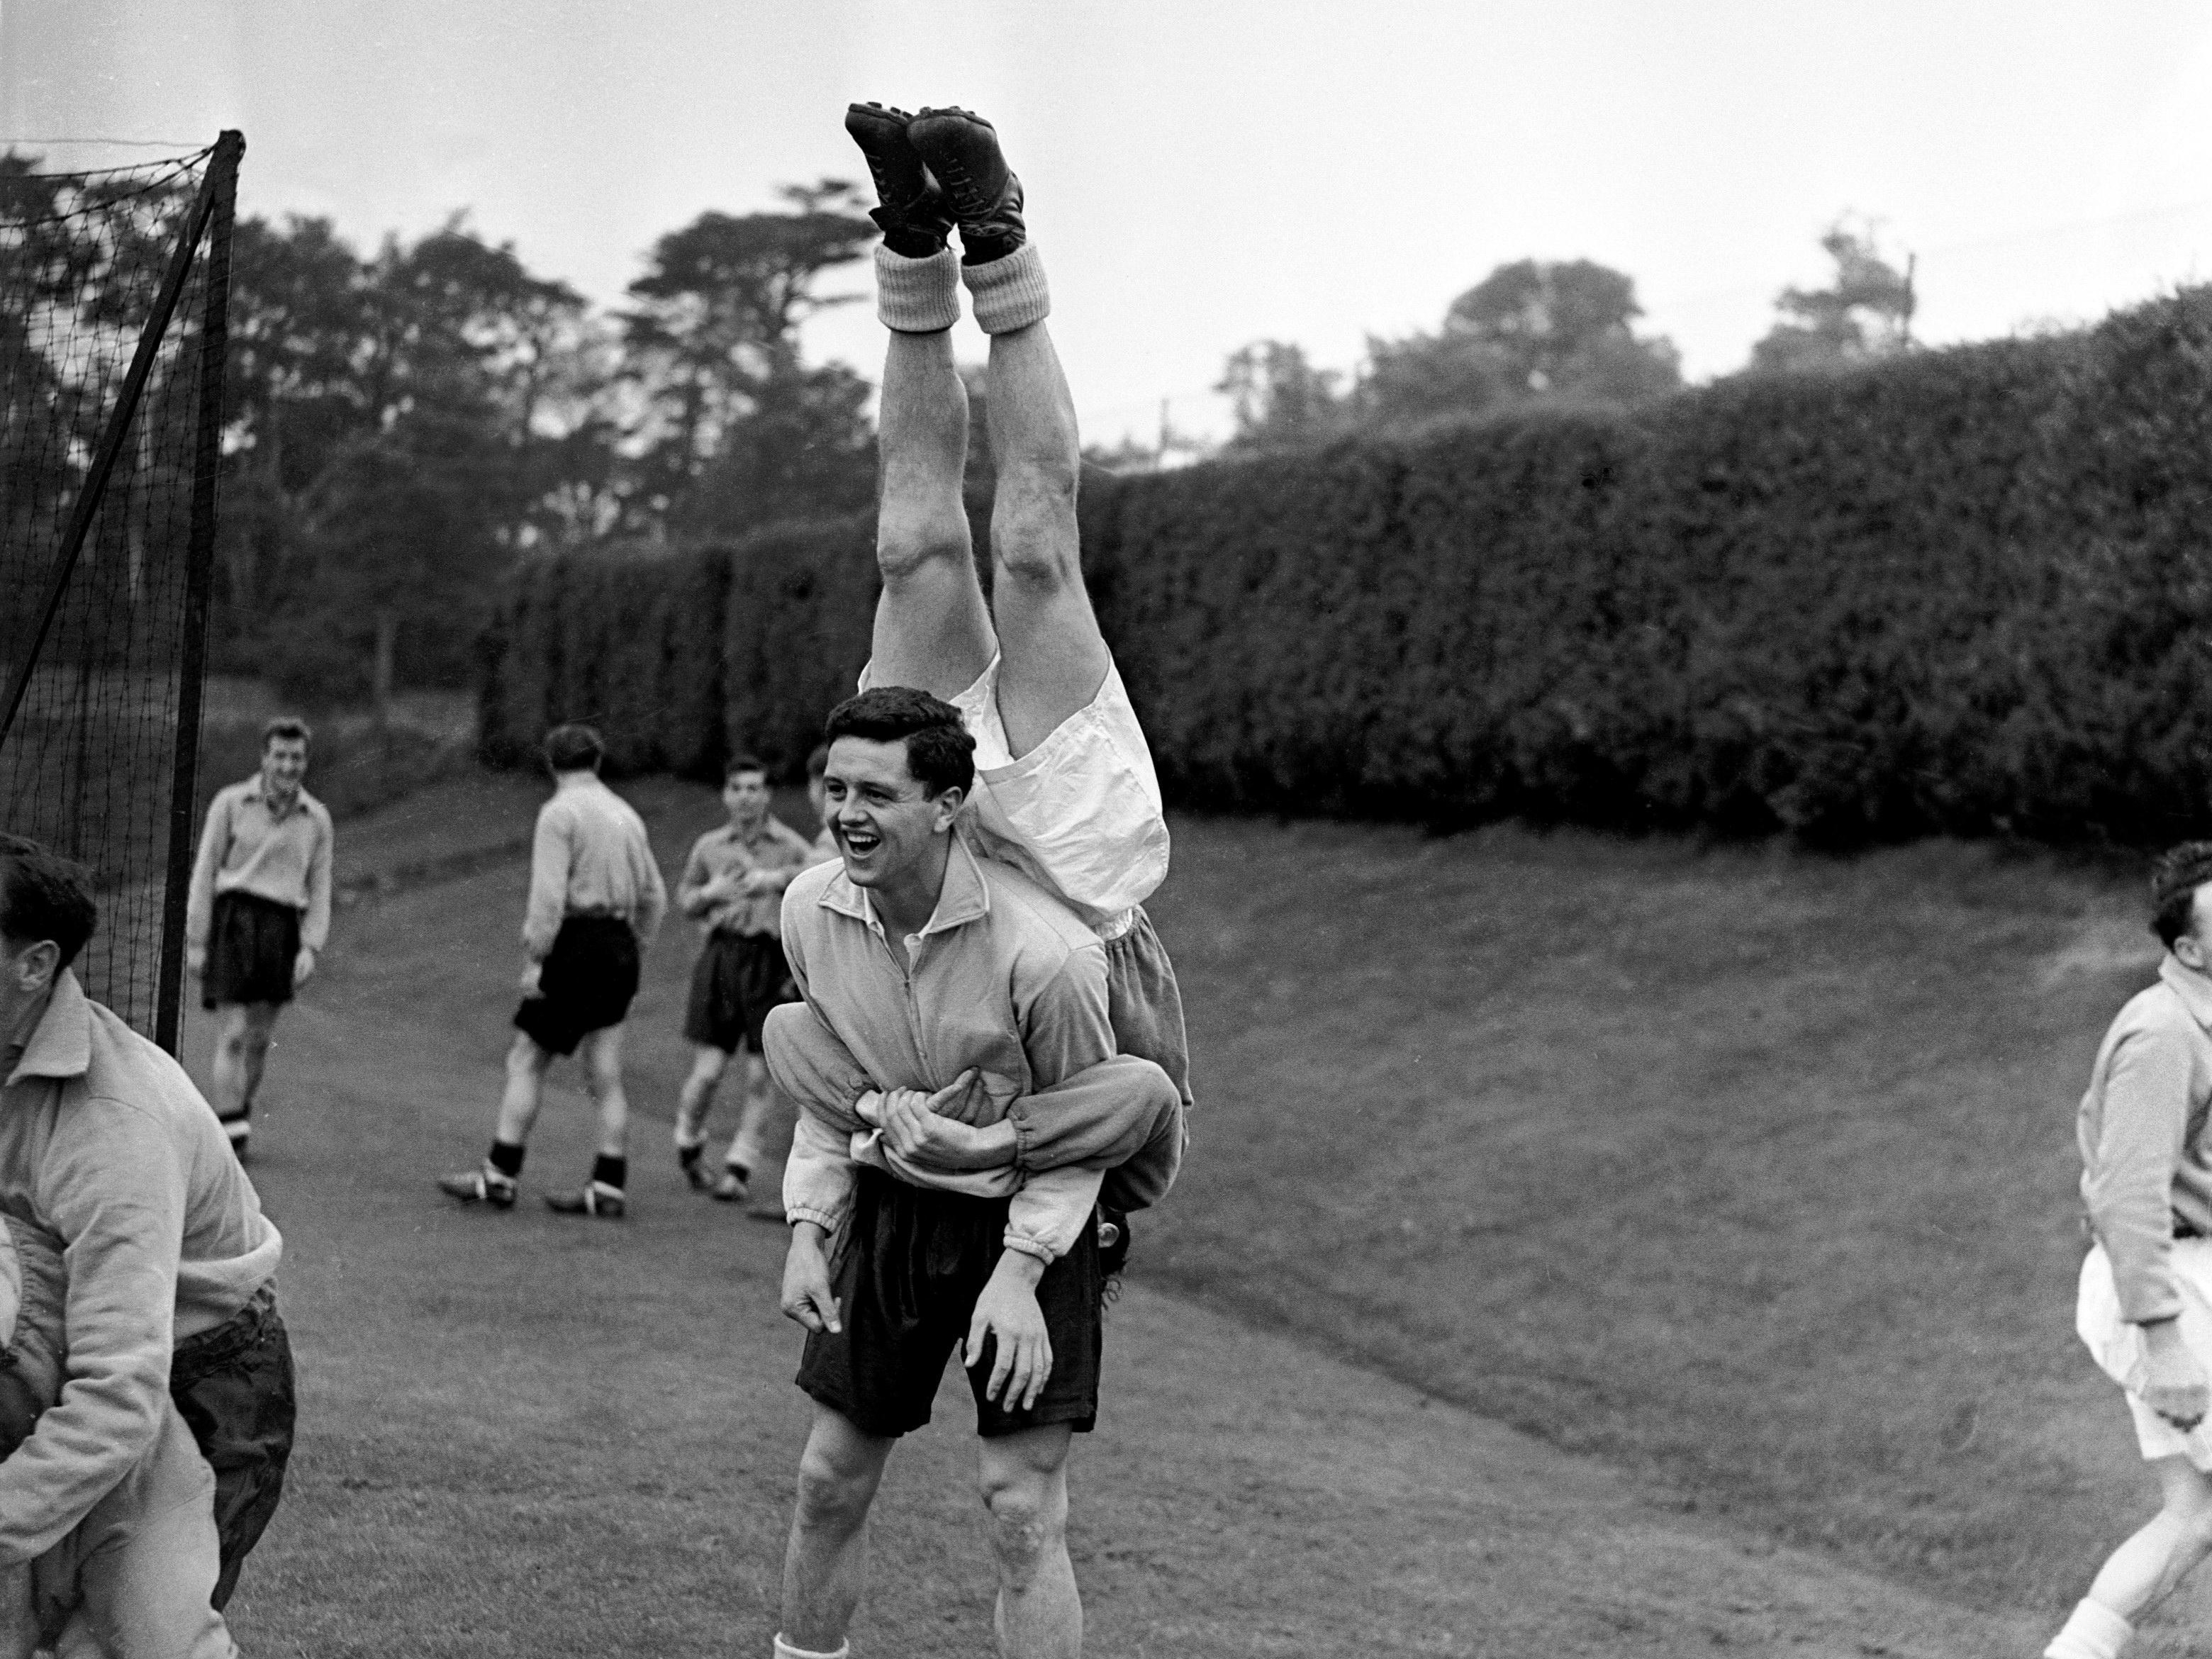 England players train ahead of the 1954 World Cup